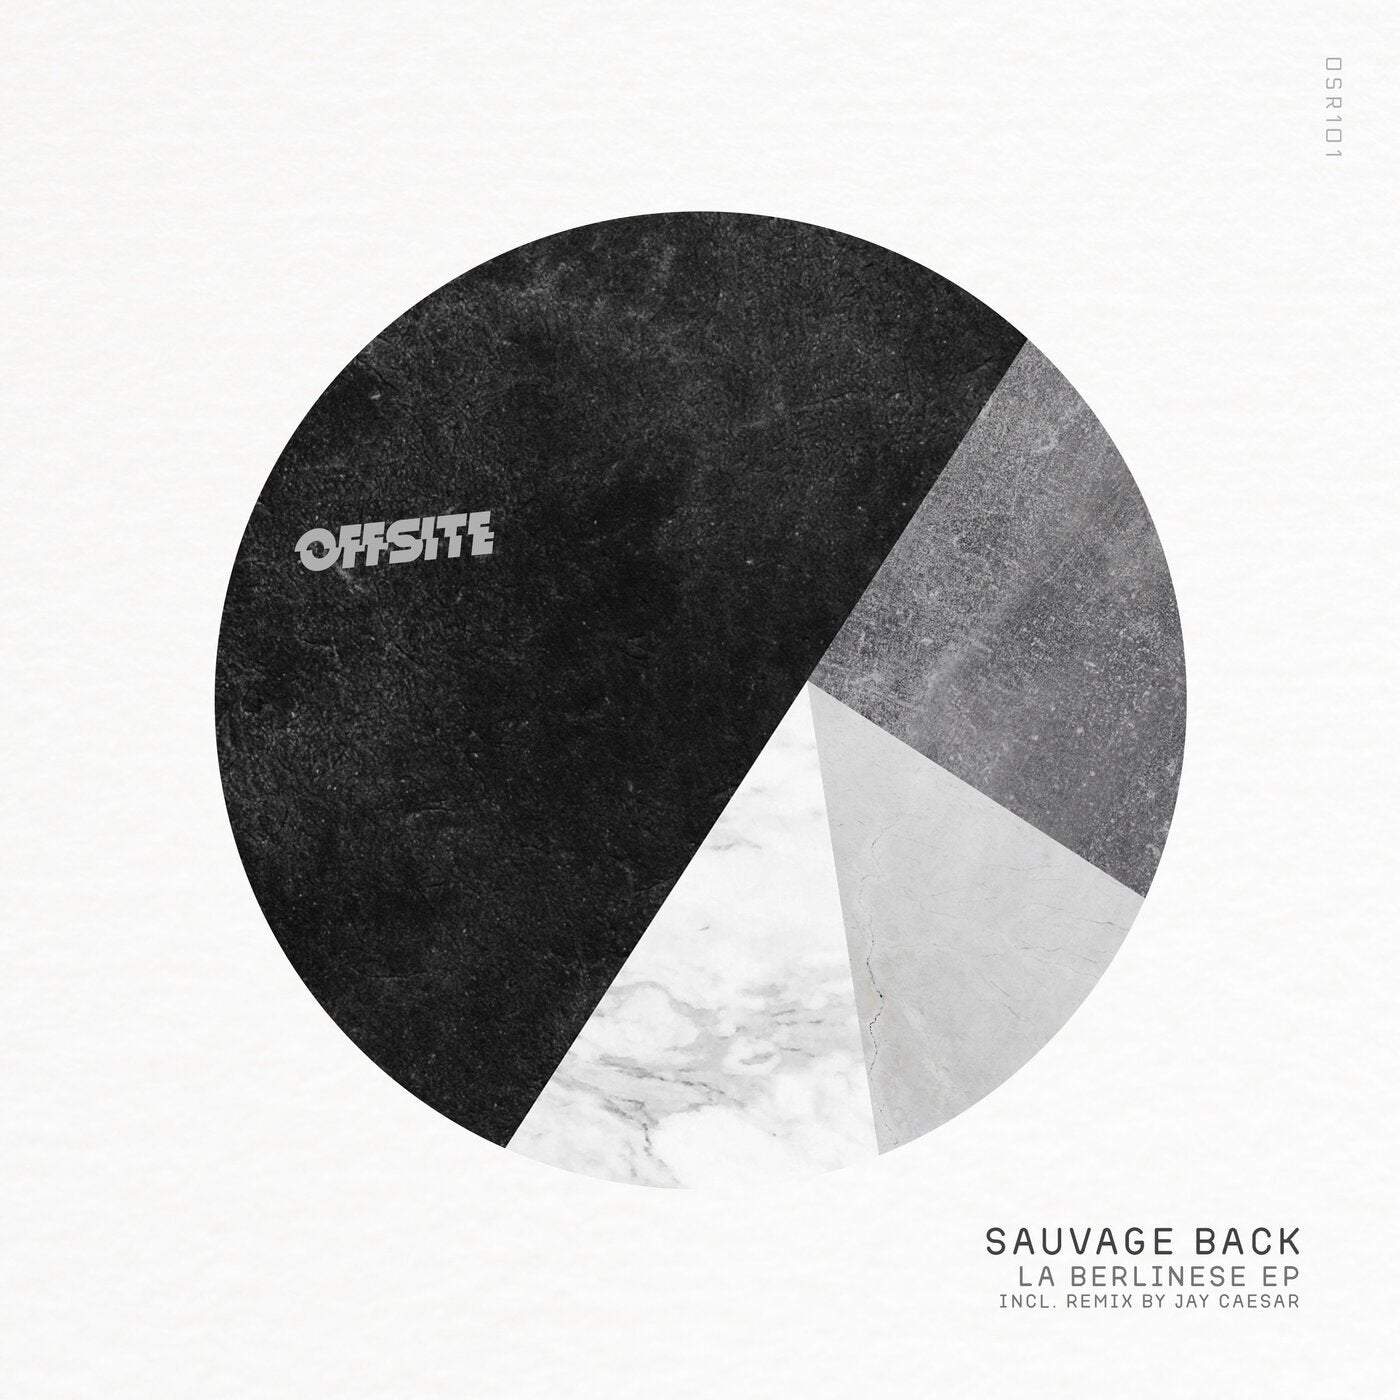 image cover: Sauvage back - La Berlinese EP / OSR101